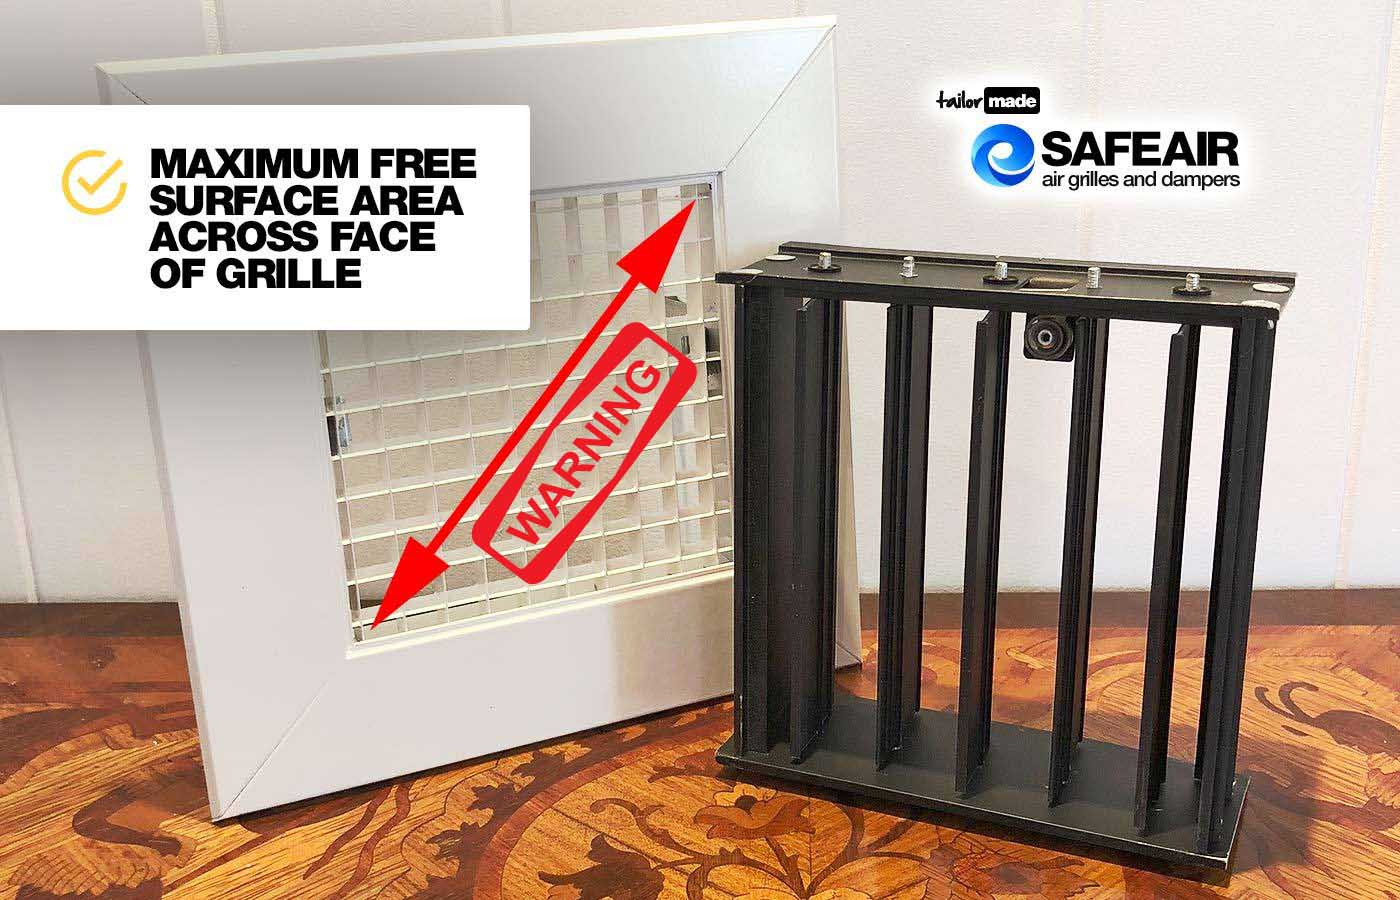 Ensure maximum free airflow across the face of the air grille or register